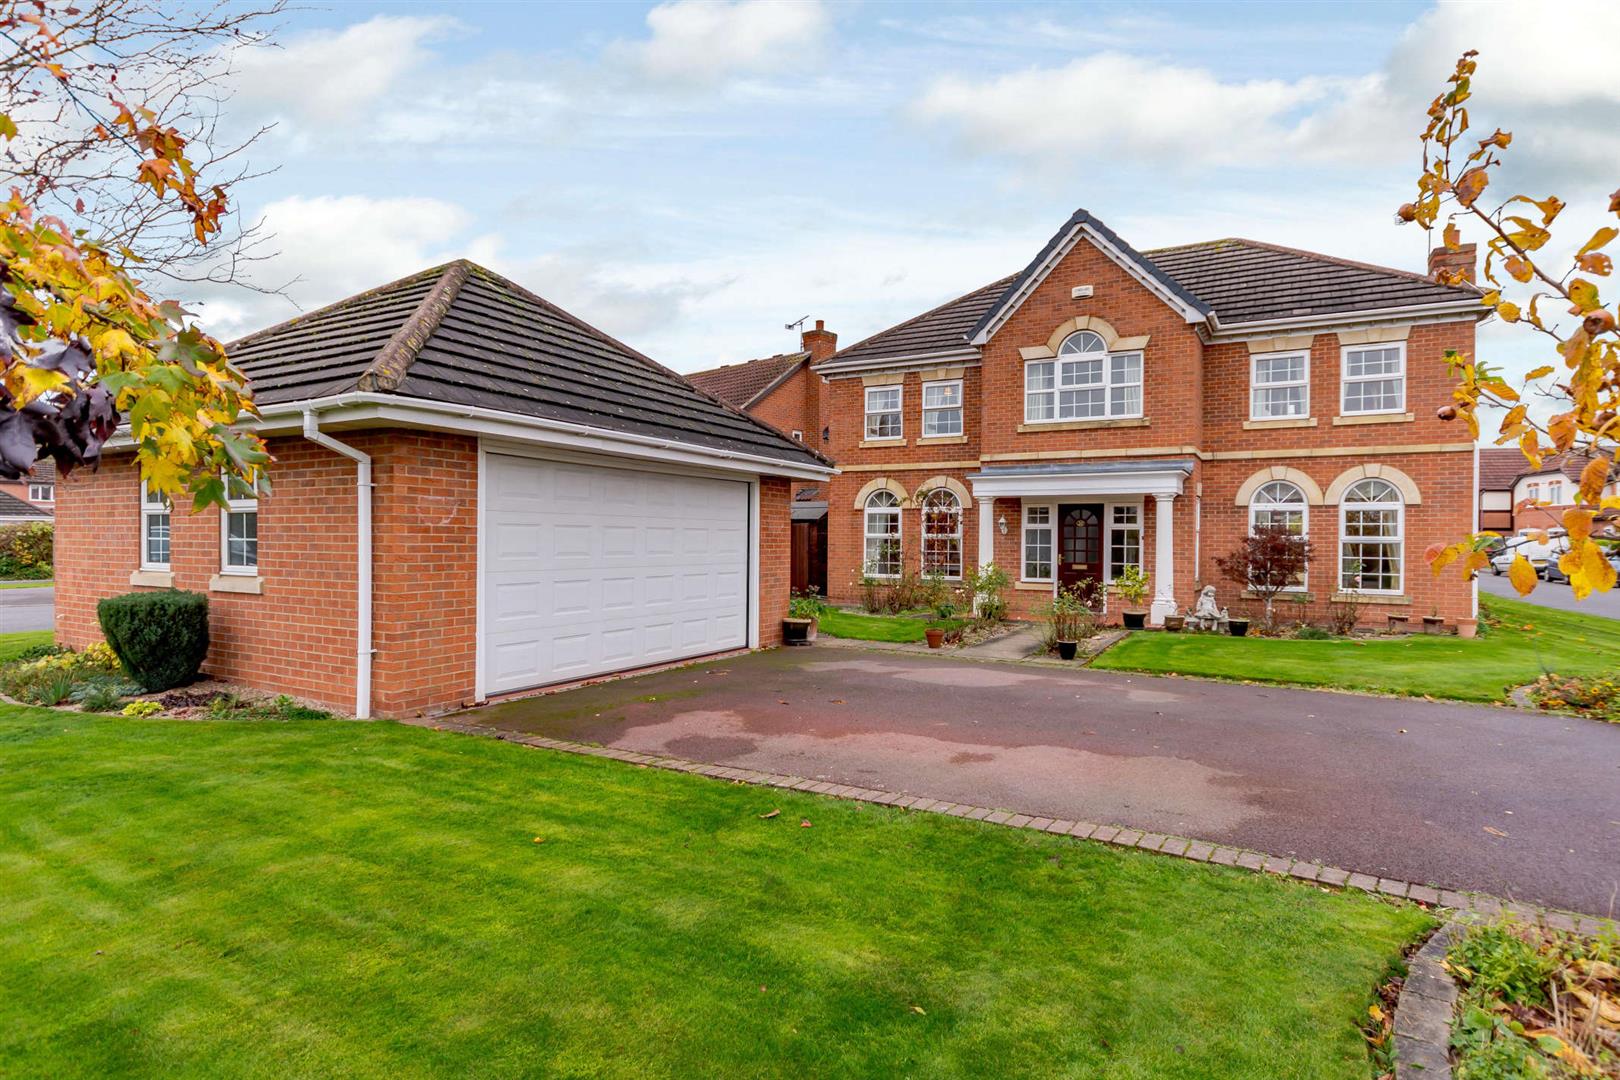 5 Bedroom Detached House For Sale In Derby